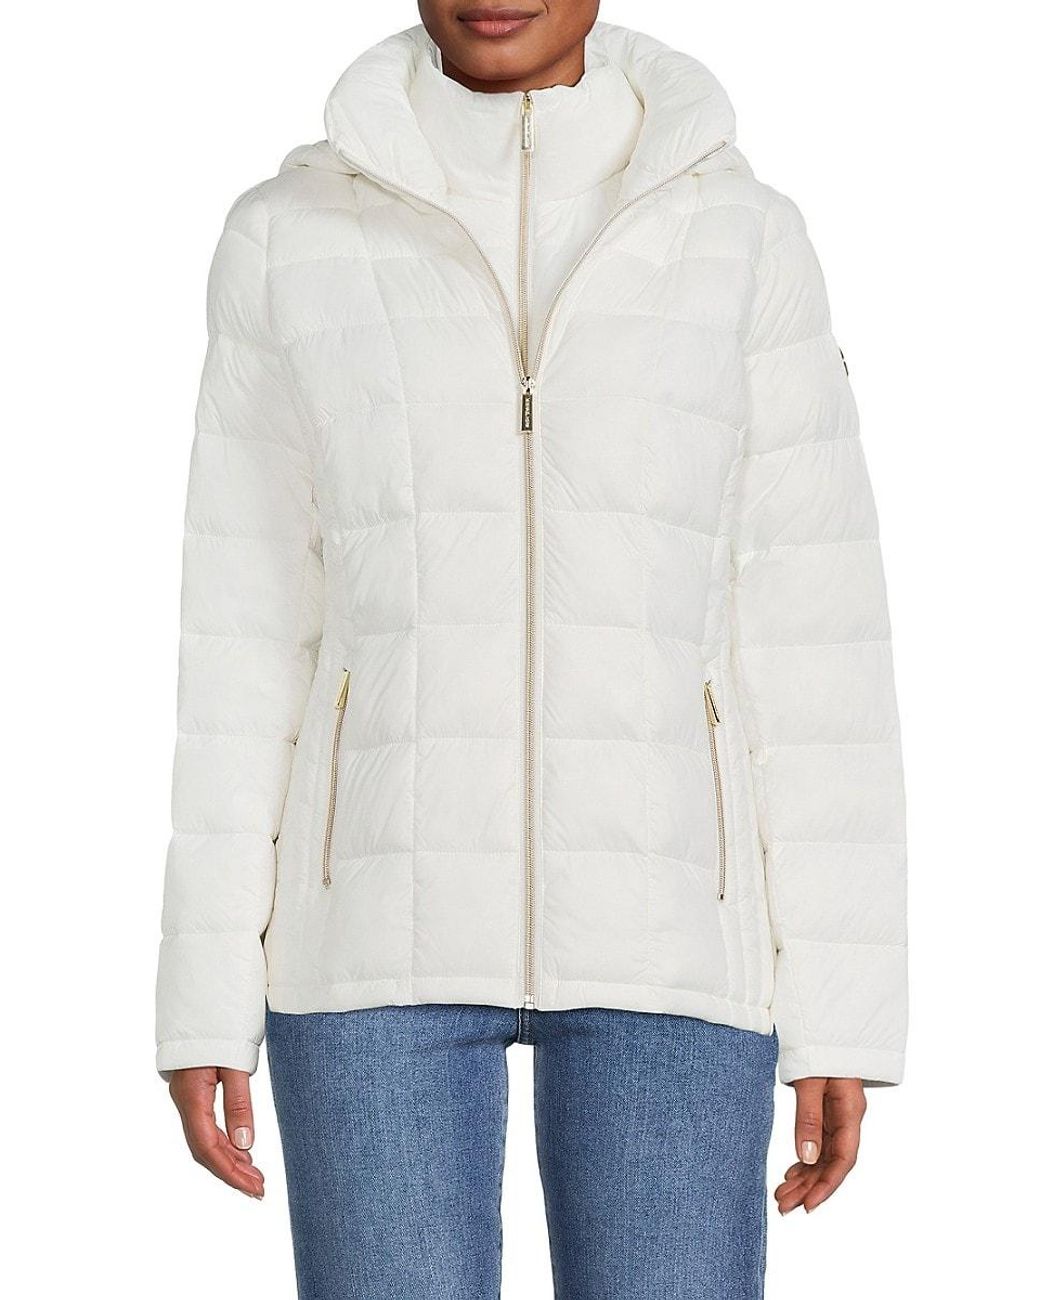 MICHAEL Michael Kors Packable Puffer Jacket in White | Lyst